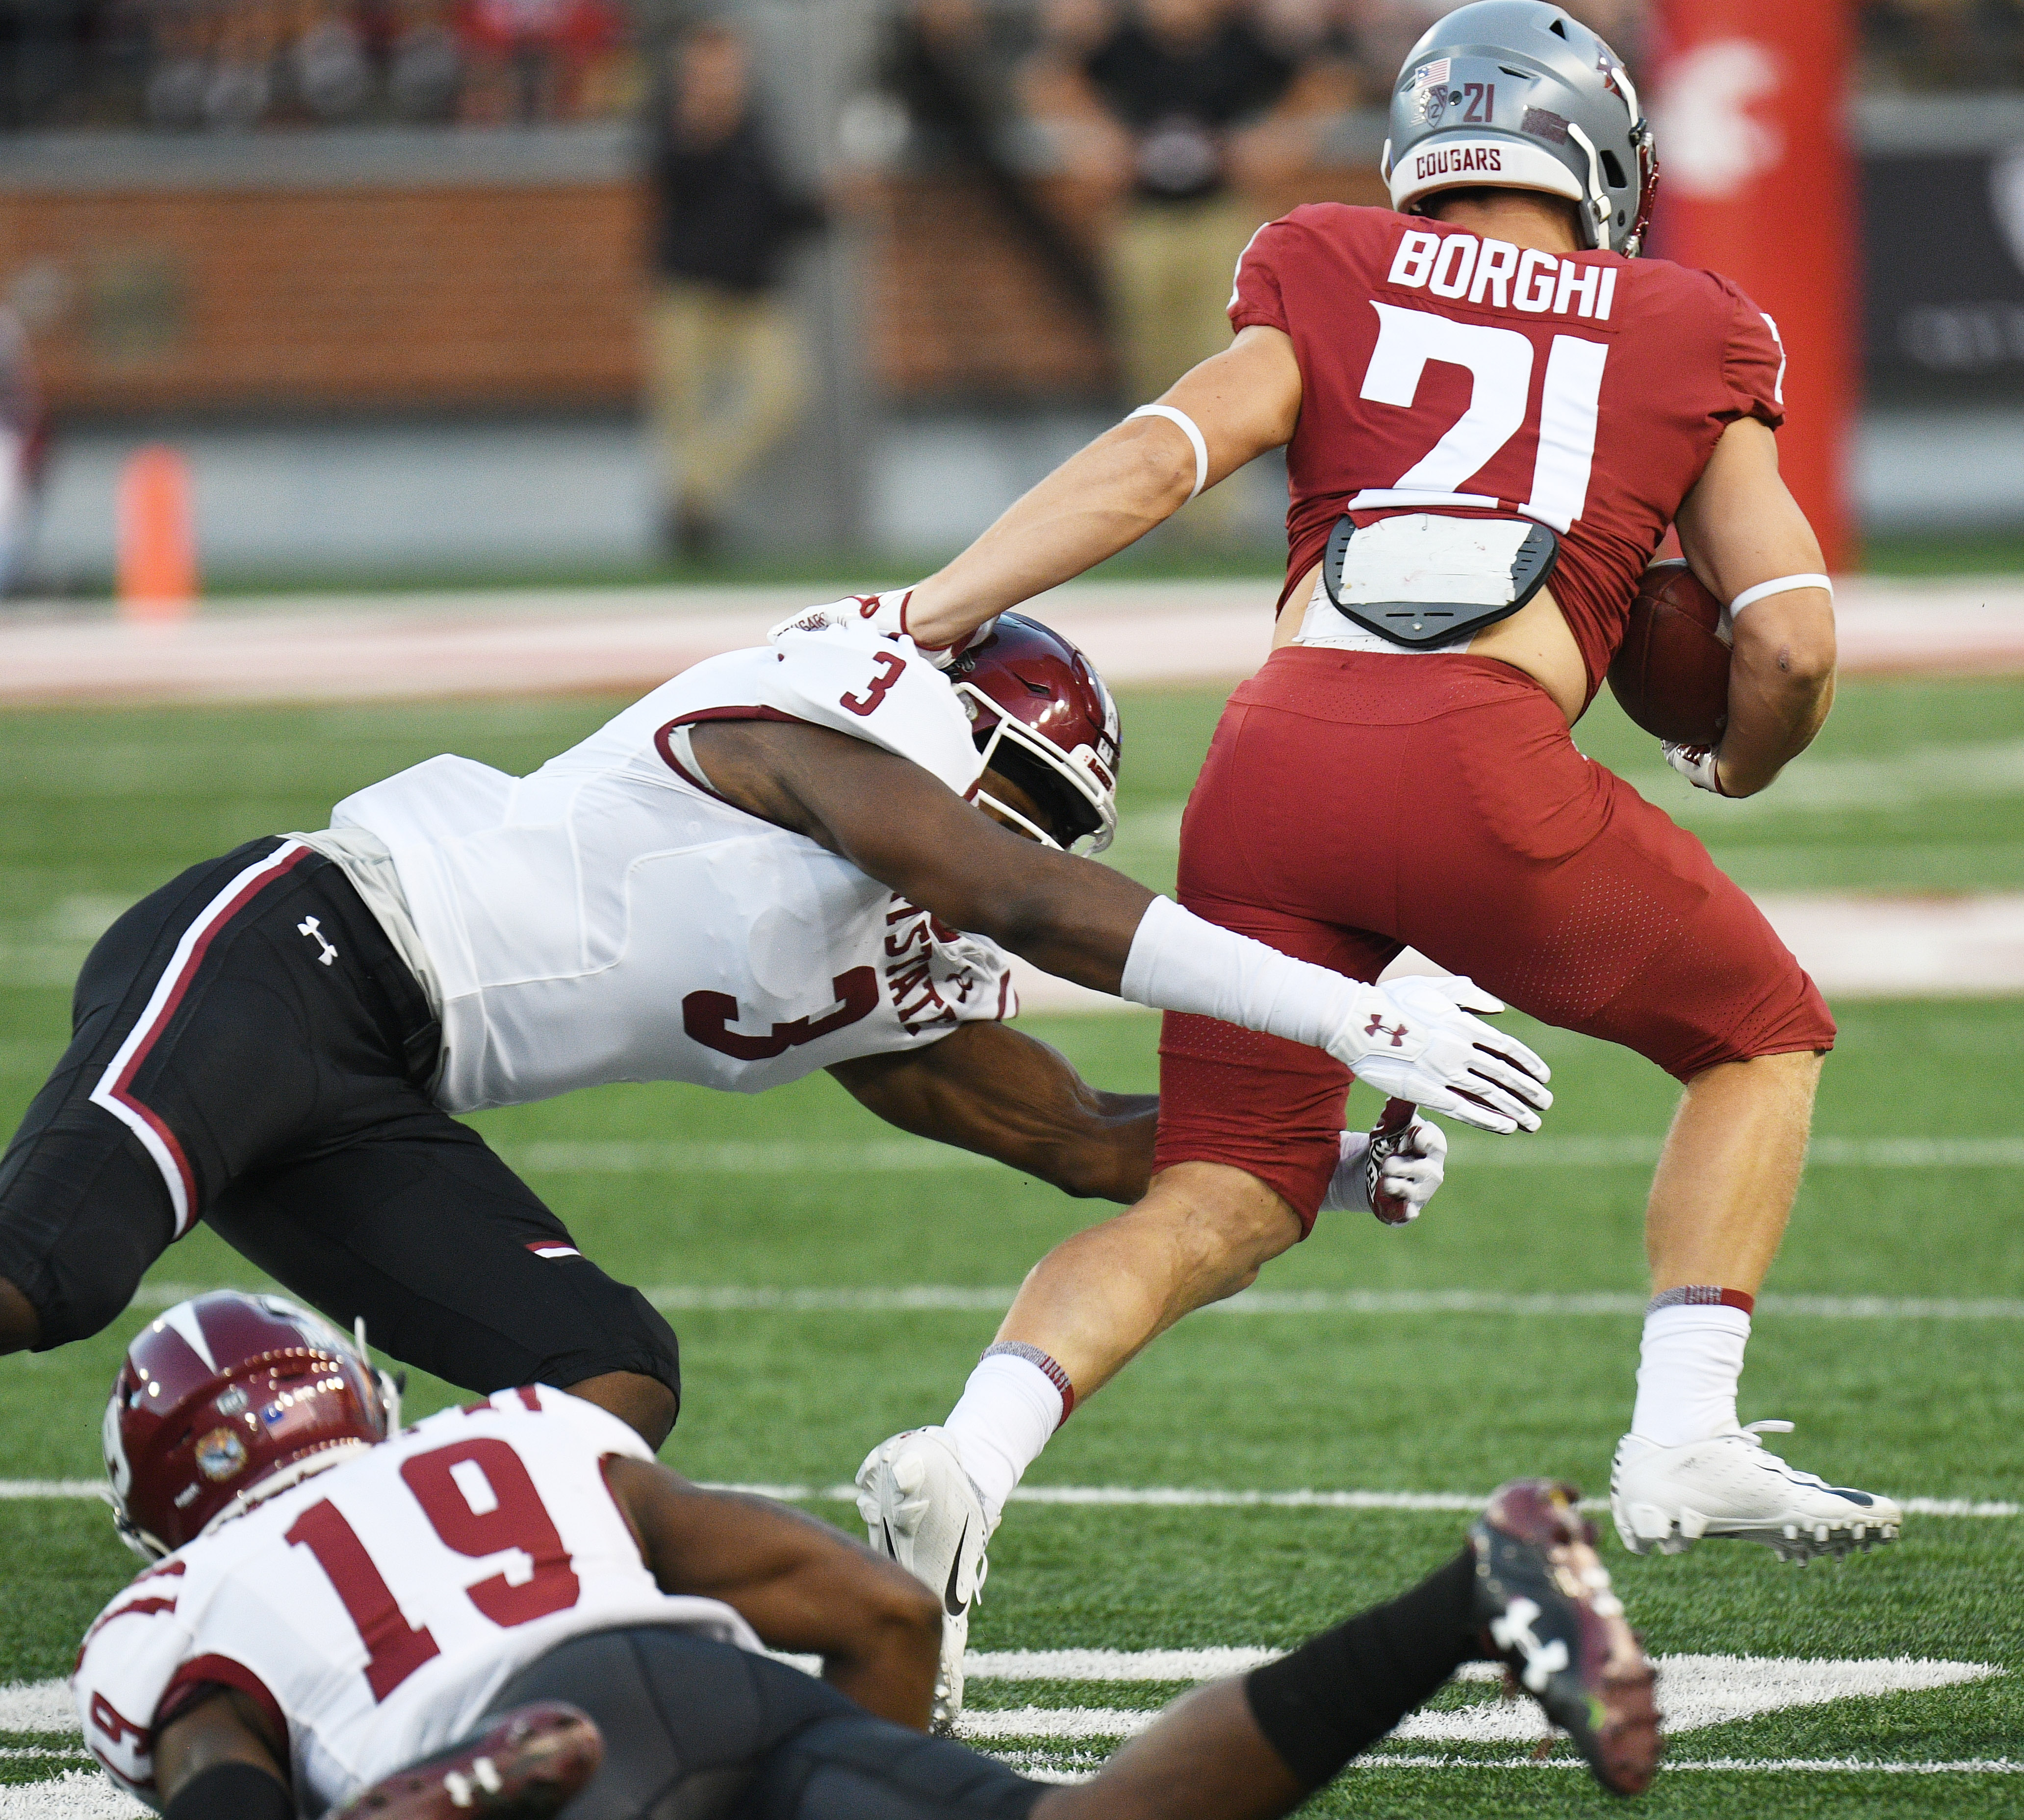 COLLEGE FOOTBALL: AUG 31 New Mexico State at Washington State